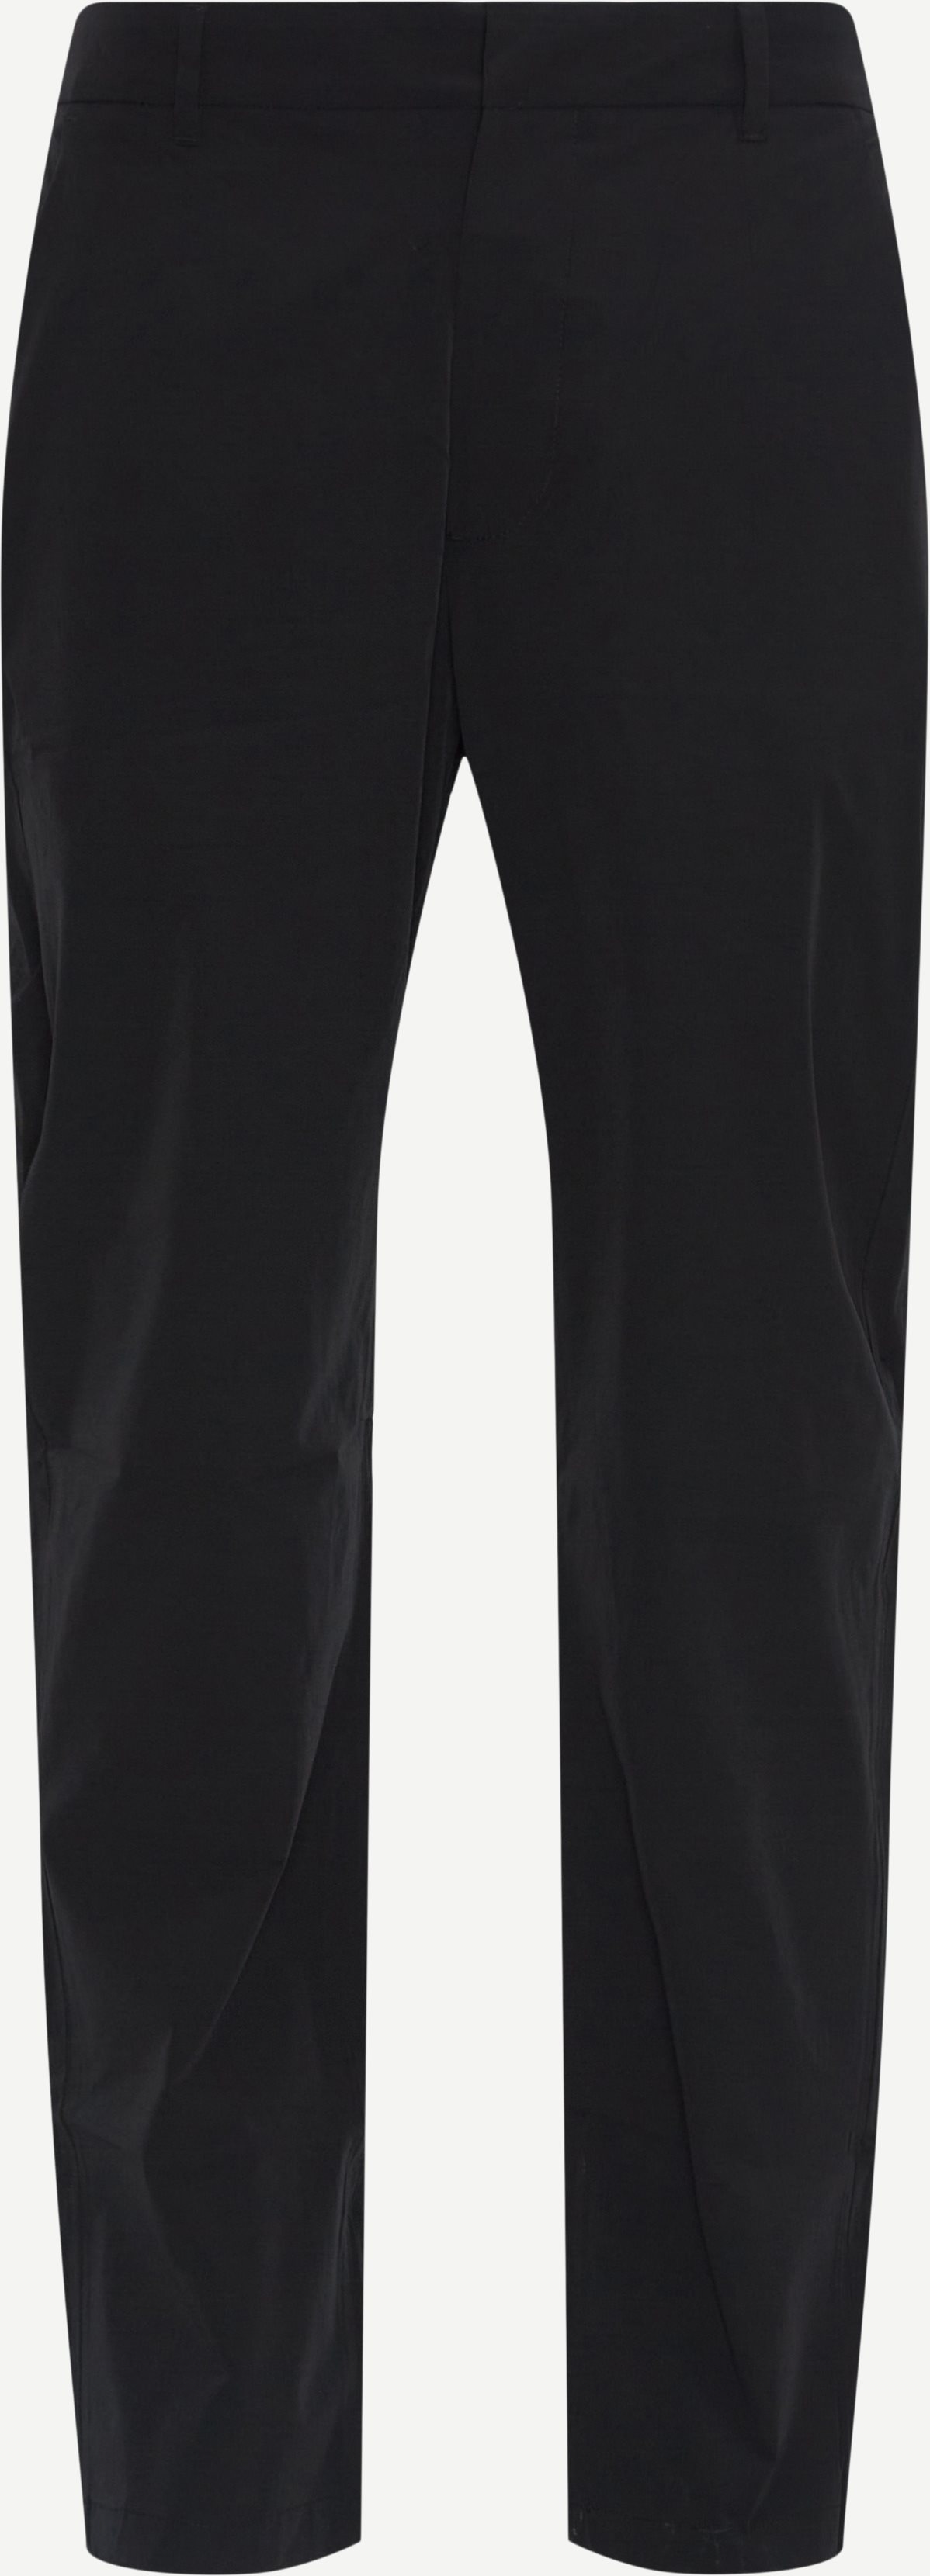 Norse Projects Trousers AAREN TRAVEL LIGHT N25-0371 Black